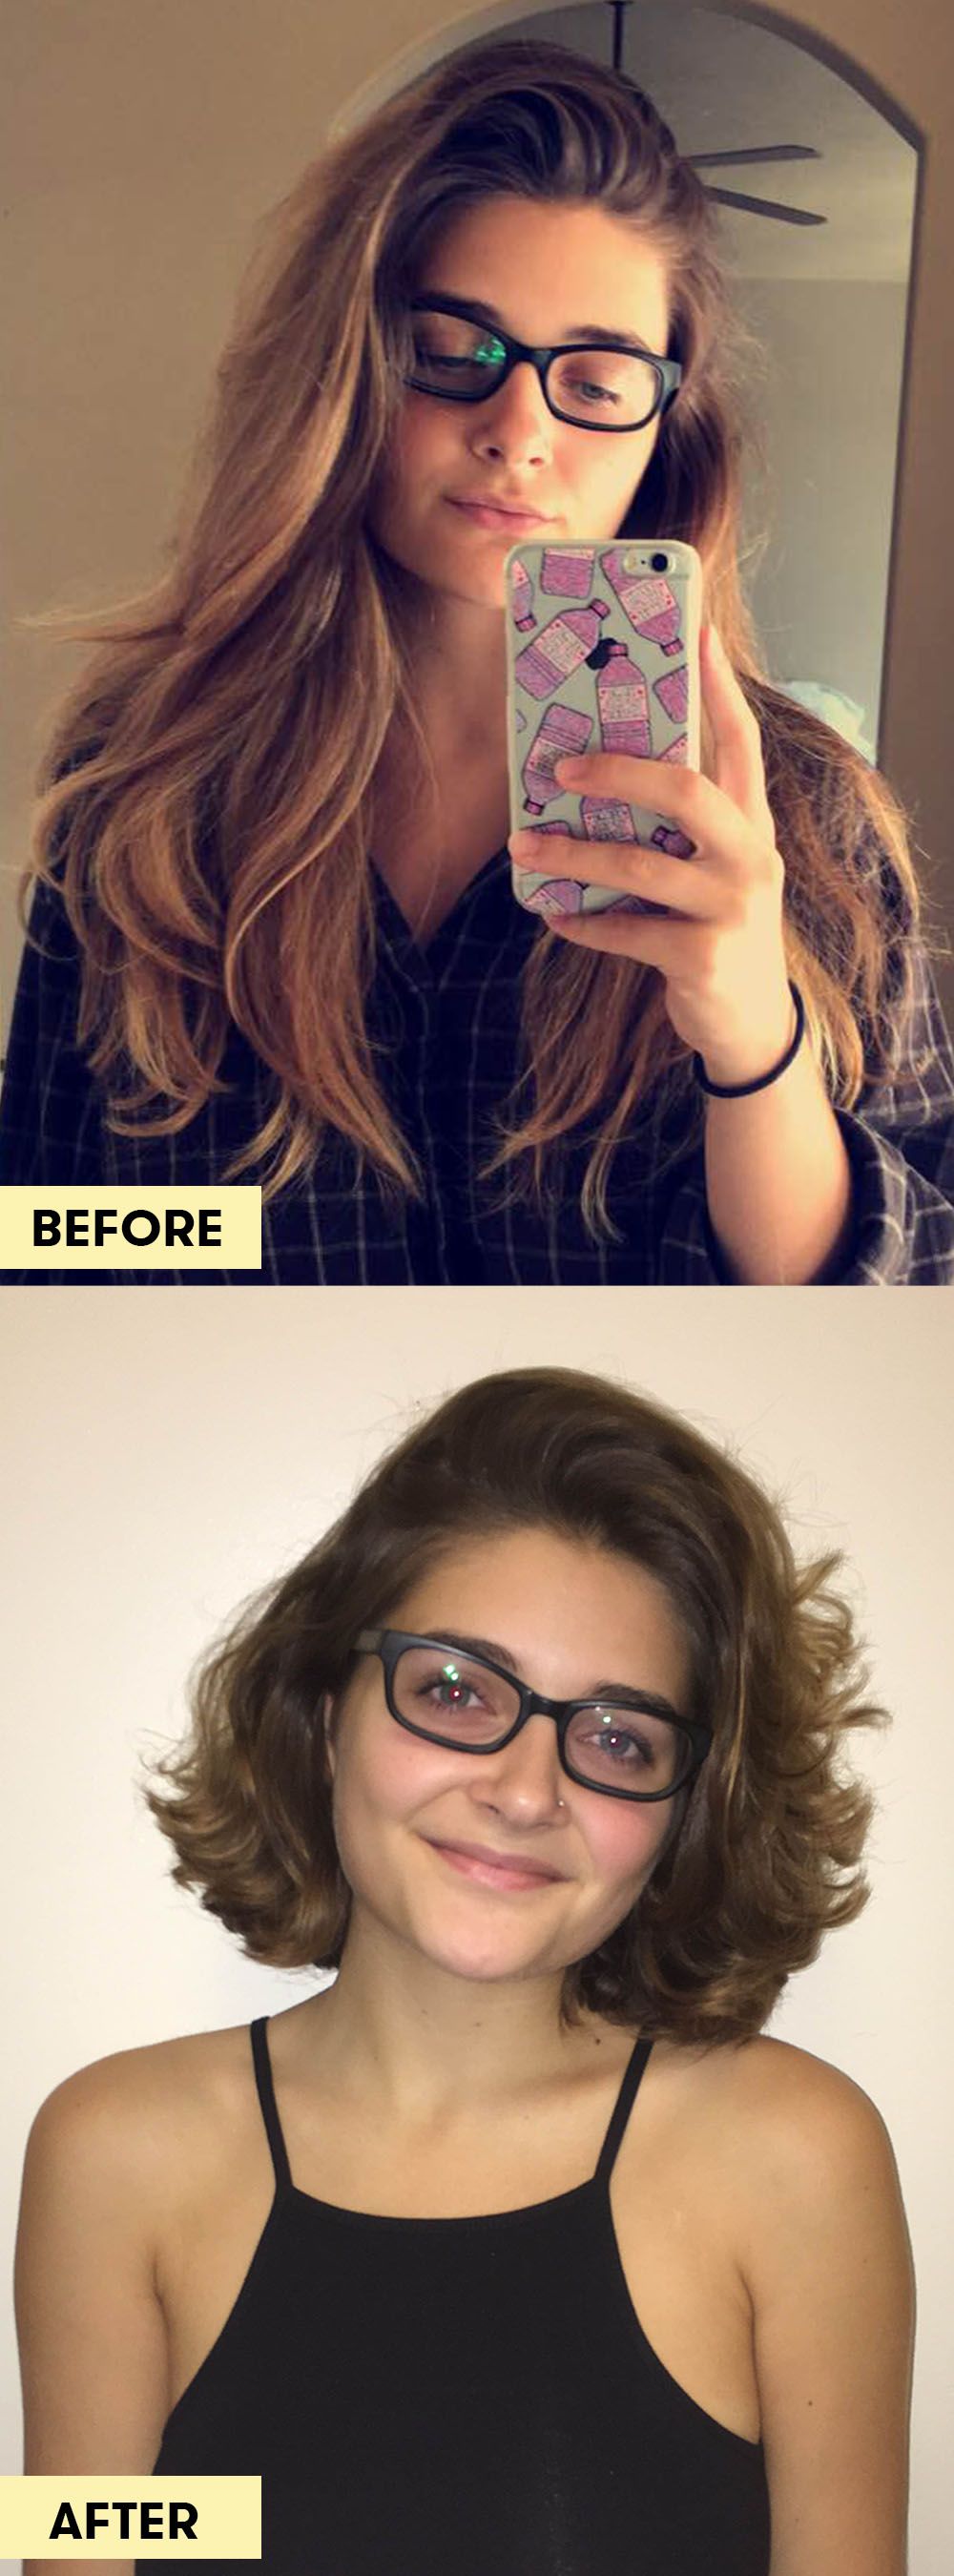 Makeup Hacks For Girls With Glasses - SUGAR Cosmetics